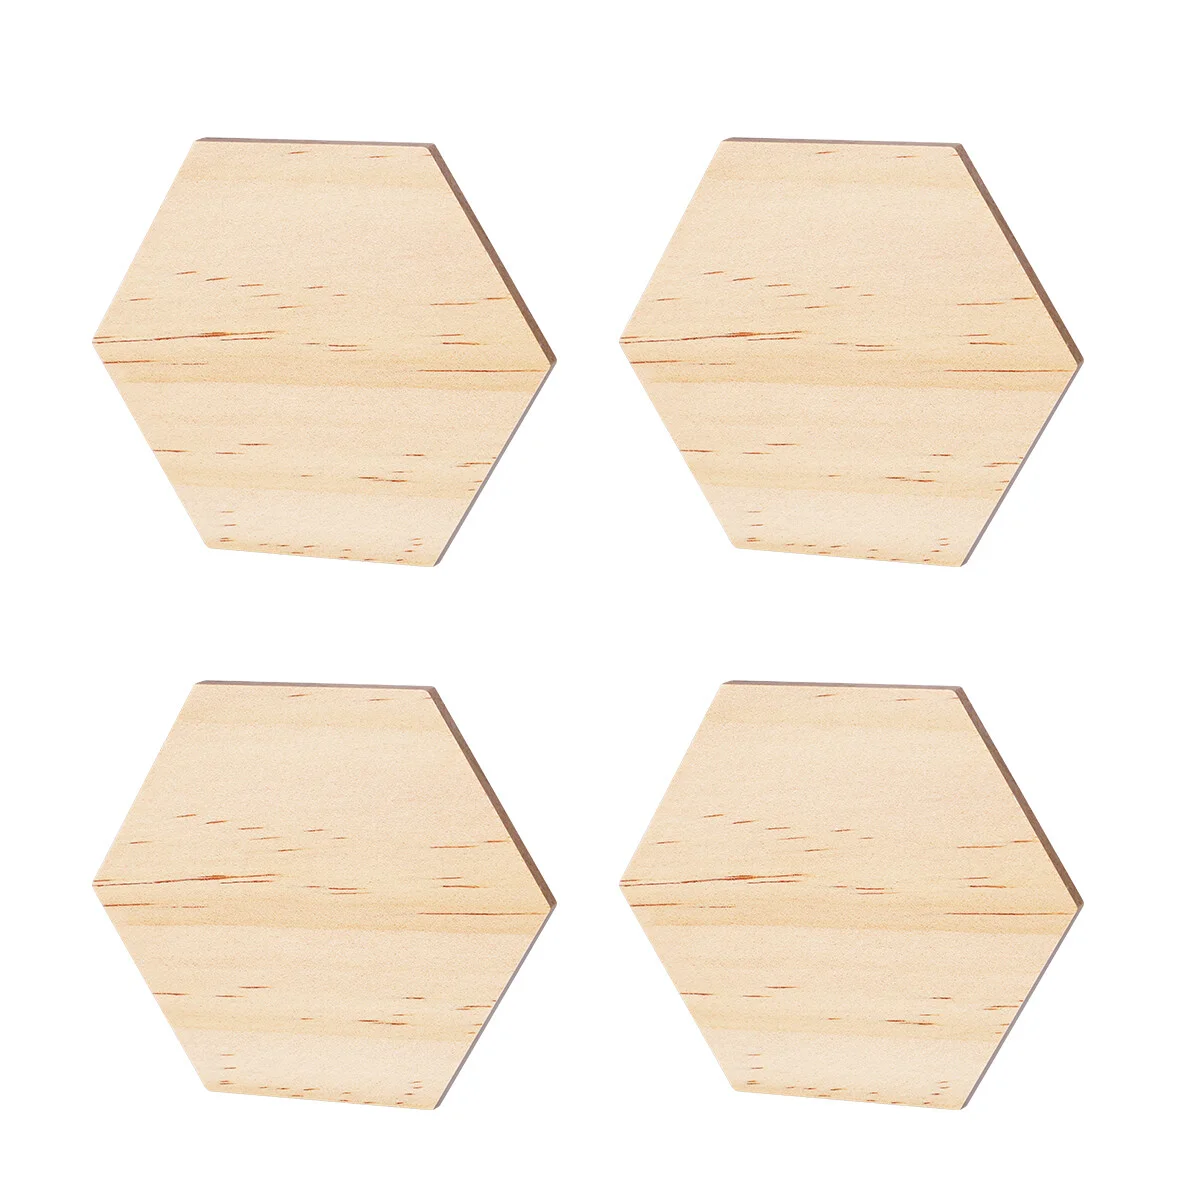 

SUPVOX 25 Pcs Wooden Hexagonal Slices Blank Name Tags Wooden Shapes Ornaments for Party Wedding Home Decoration 9cm